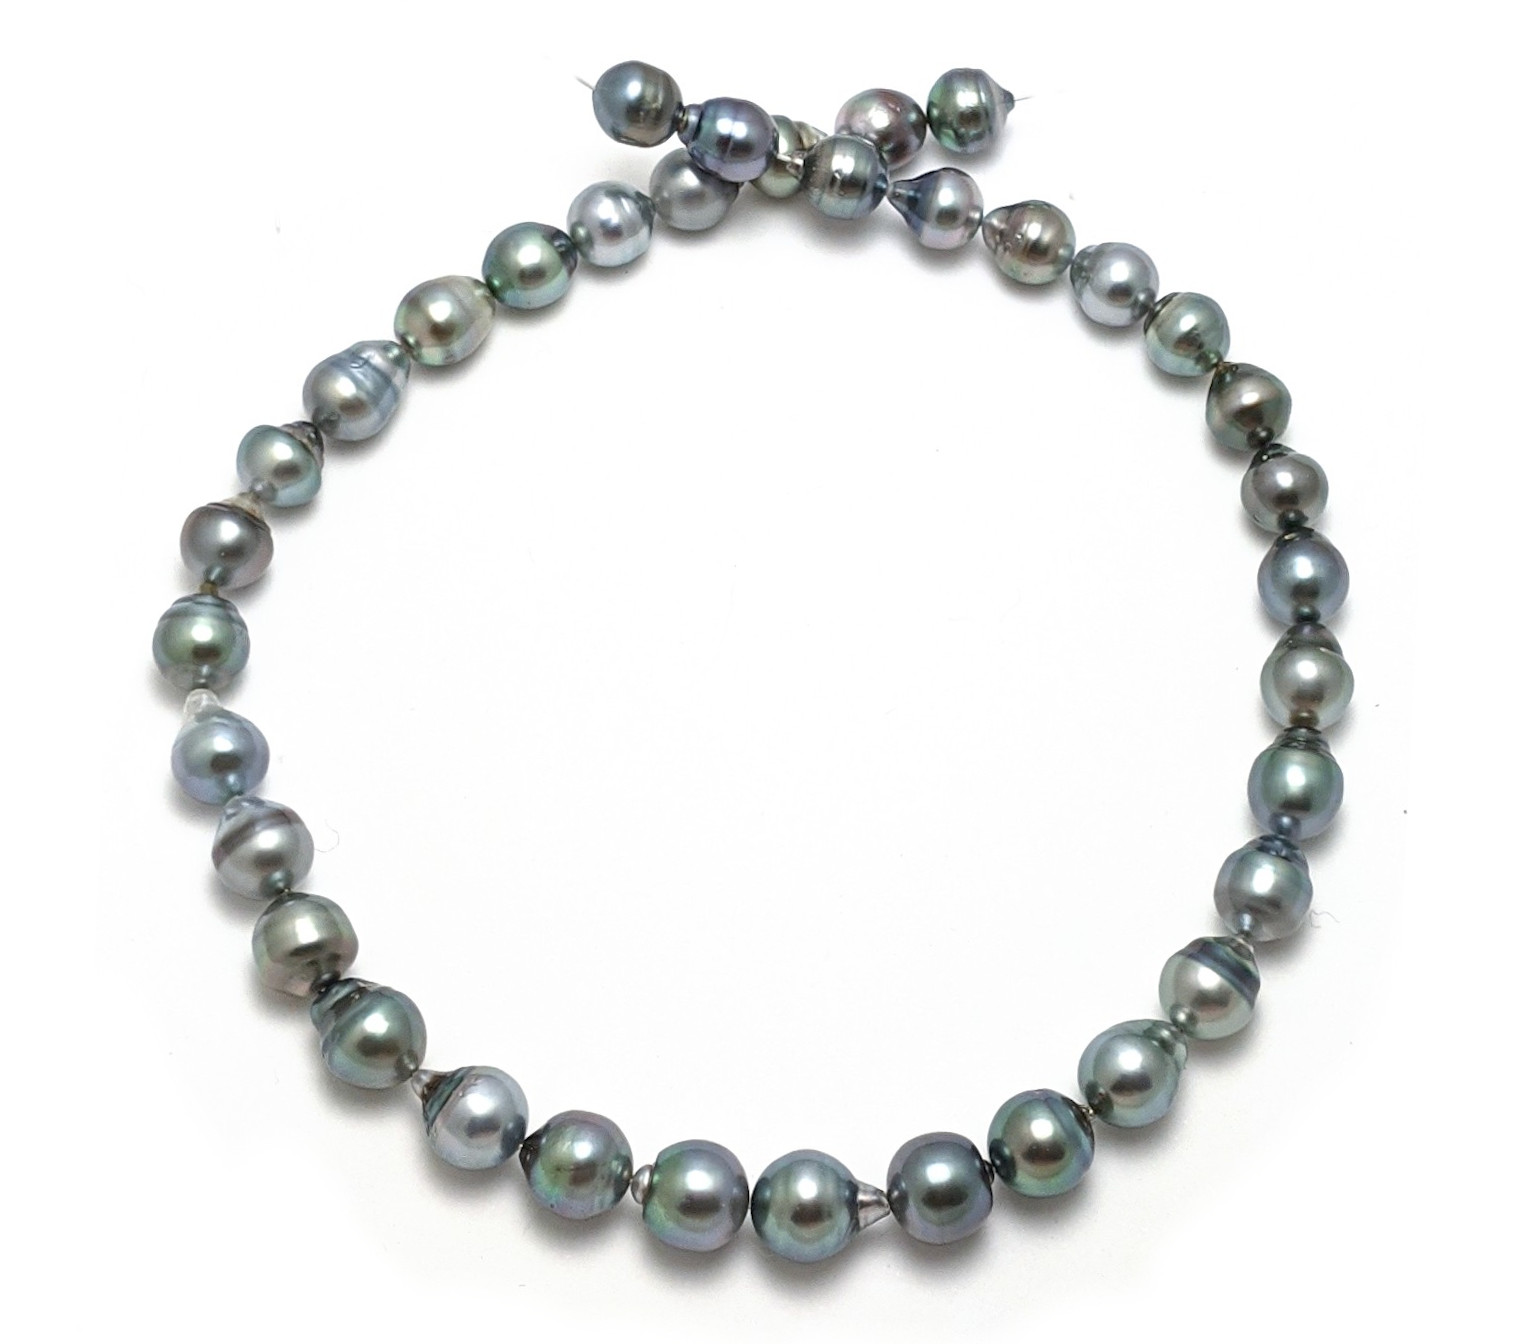 Sale Tahitian Pearl Necklace With Steely Gray Tahitian Baroque Pearls